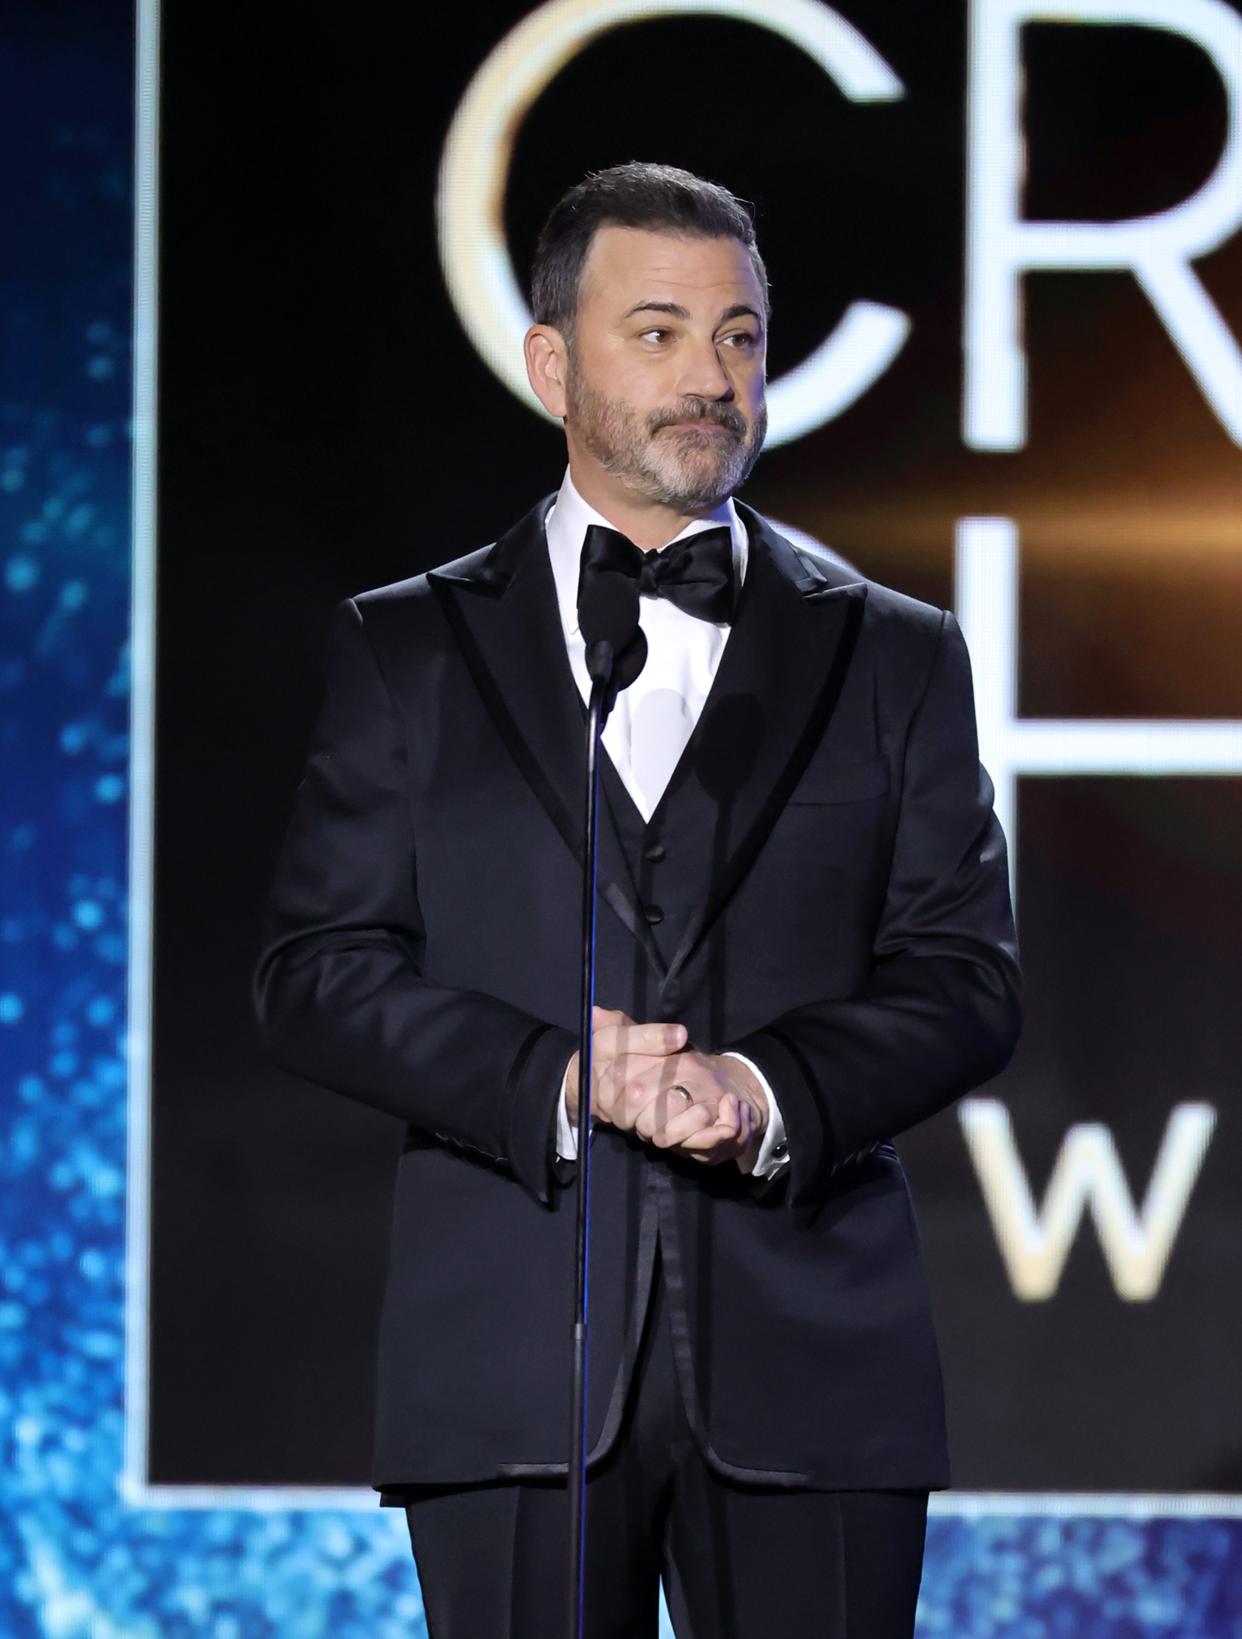 Jimmy Kimmel says he had never "met, flown with, visited, or had any contact whatsoever with (Jeffrey) Epstein, nor will you find my name on any ‘list.’"